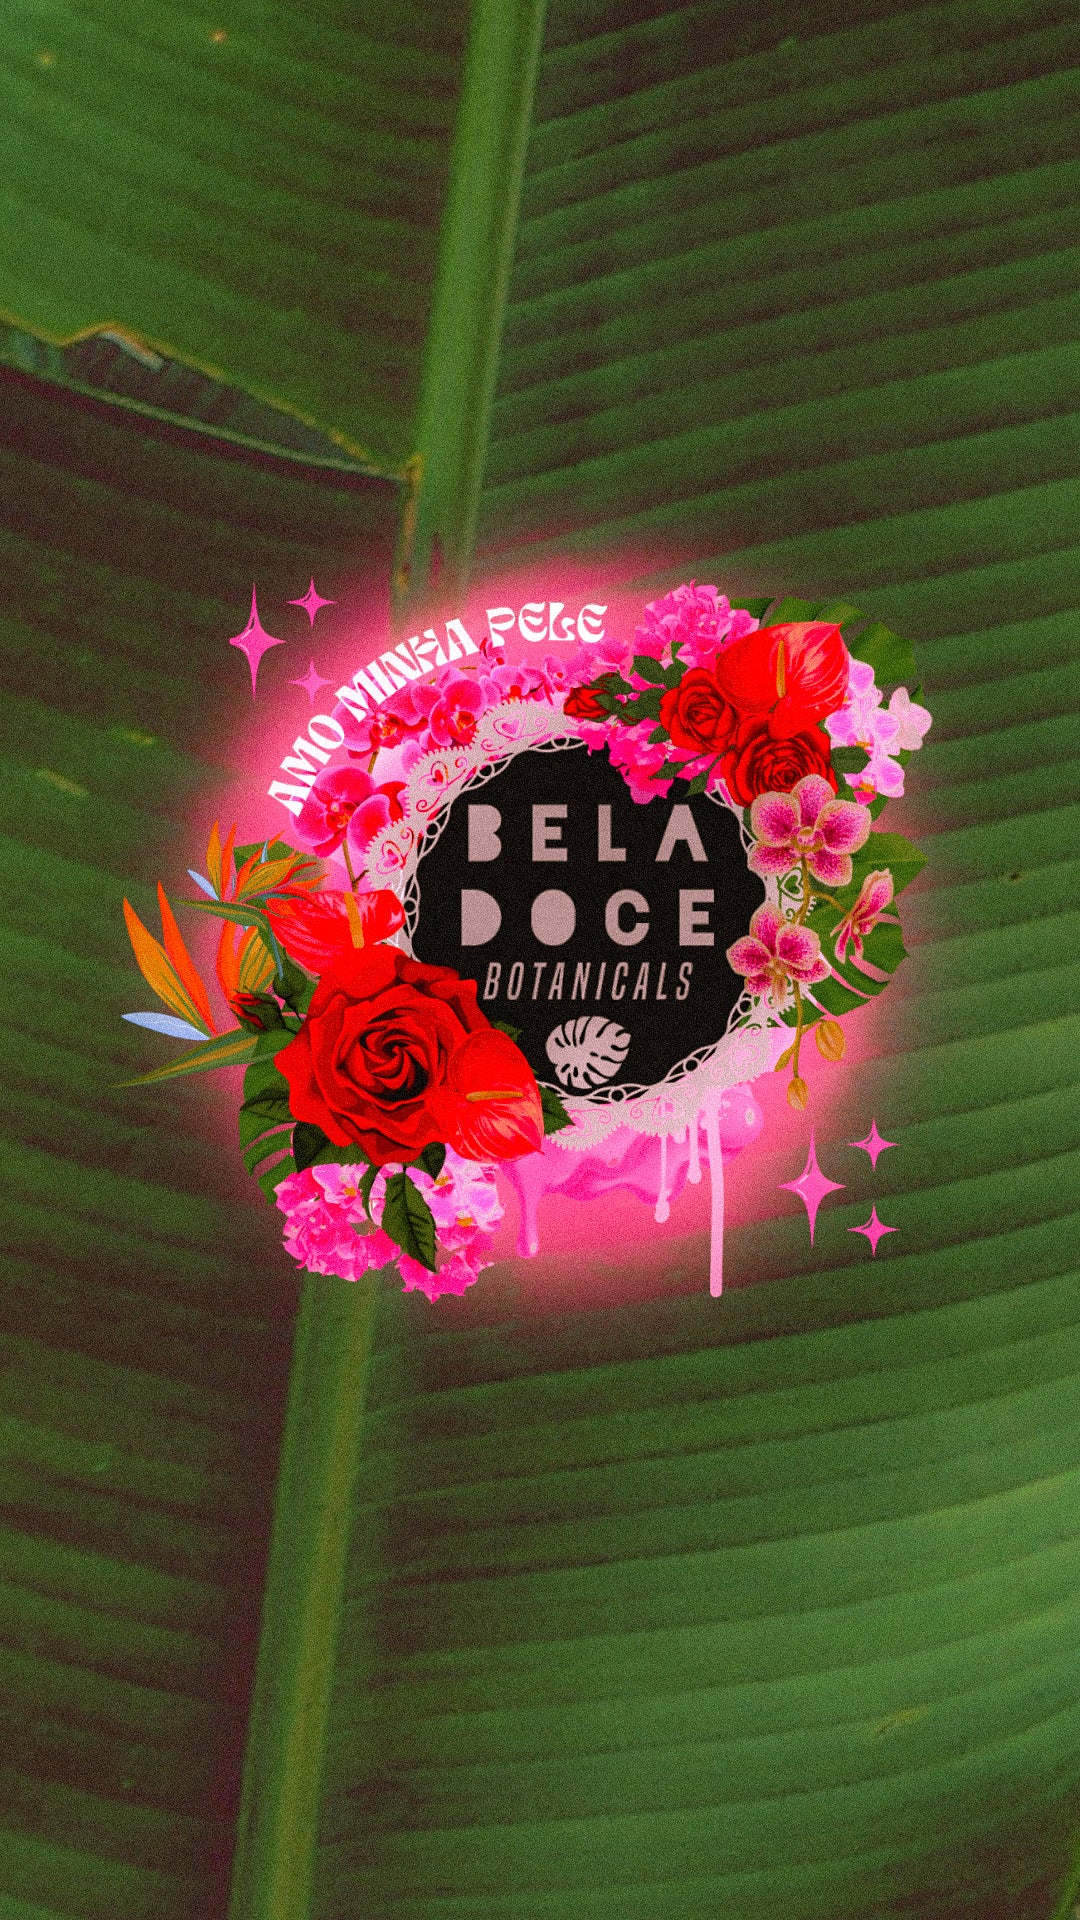 Beladoce Botanicals®️ banana leaf orchid white crochet white lace palm leaf orchid and emerald aesthetic collage of tropical landscape around Beladoce logo. Text reads “amo minha pele” which means I love my skin in Portuguese